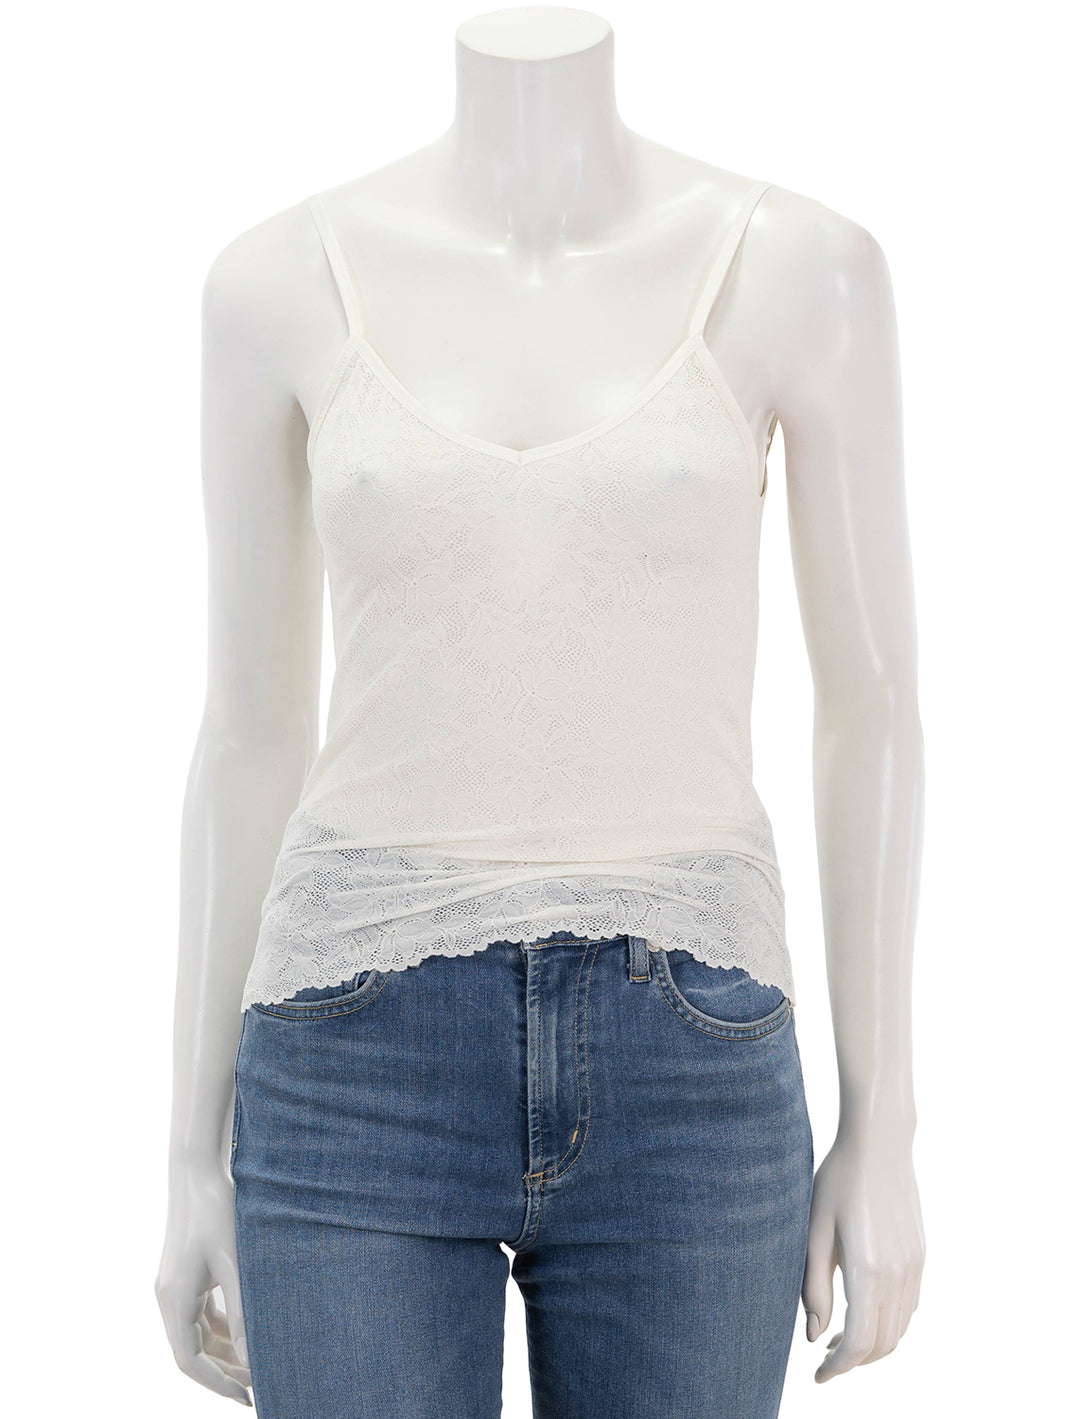 Front view of Eberjey's soft stretch recycled lace cami in ivory.